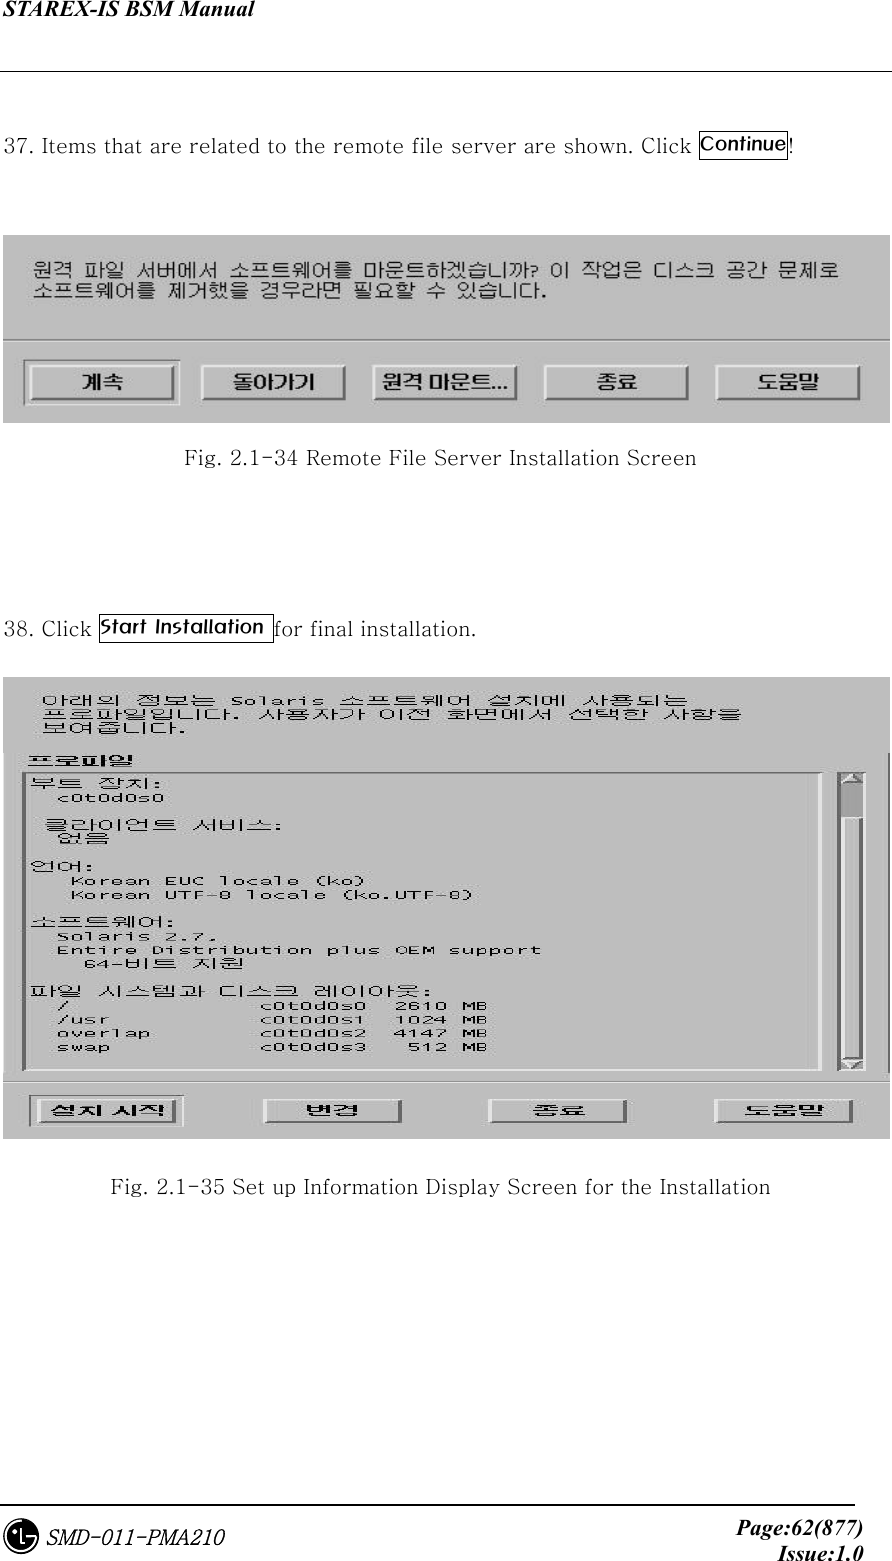 STAREX-IS BSM Manual     Page:62(877)Issue:1.0SMD-011-PMA210  37. Items that are related to the remote file server are shown. Click Continue!   Fig. 2.1-34 Remote File Server Installation Screen     38. Click Start Installation for final installation.  Fig. 2.1-35 Set up Information Display Screen for the Installation     